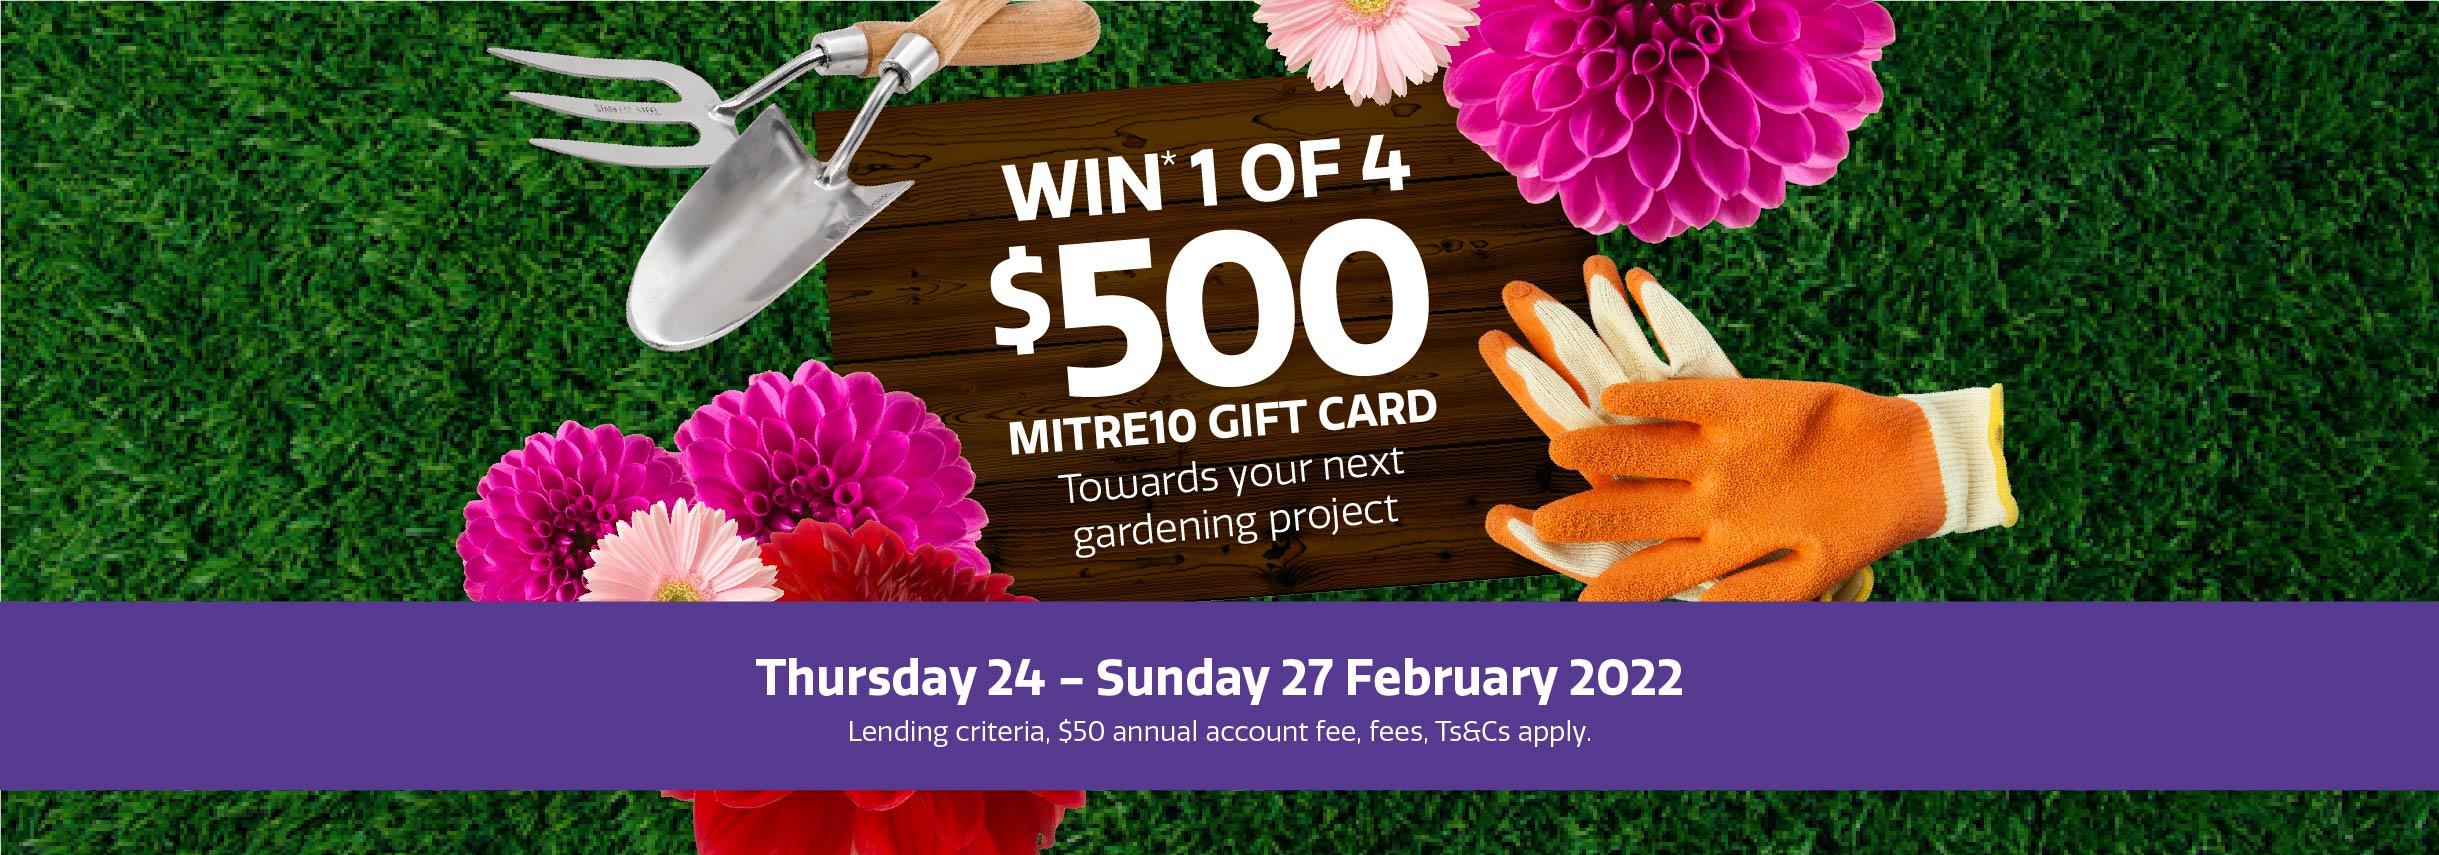 Want a Blooming Marvelous Backyard? WIN* $500 Towards your next gardening project